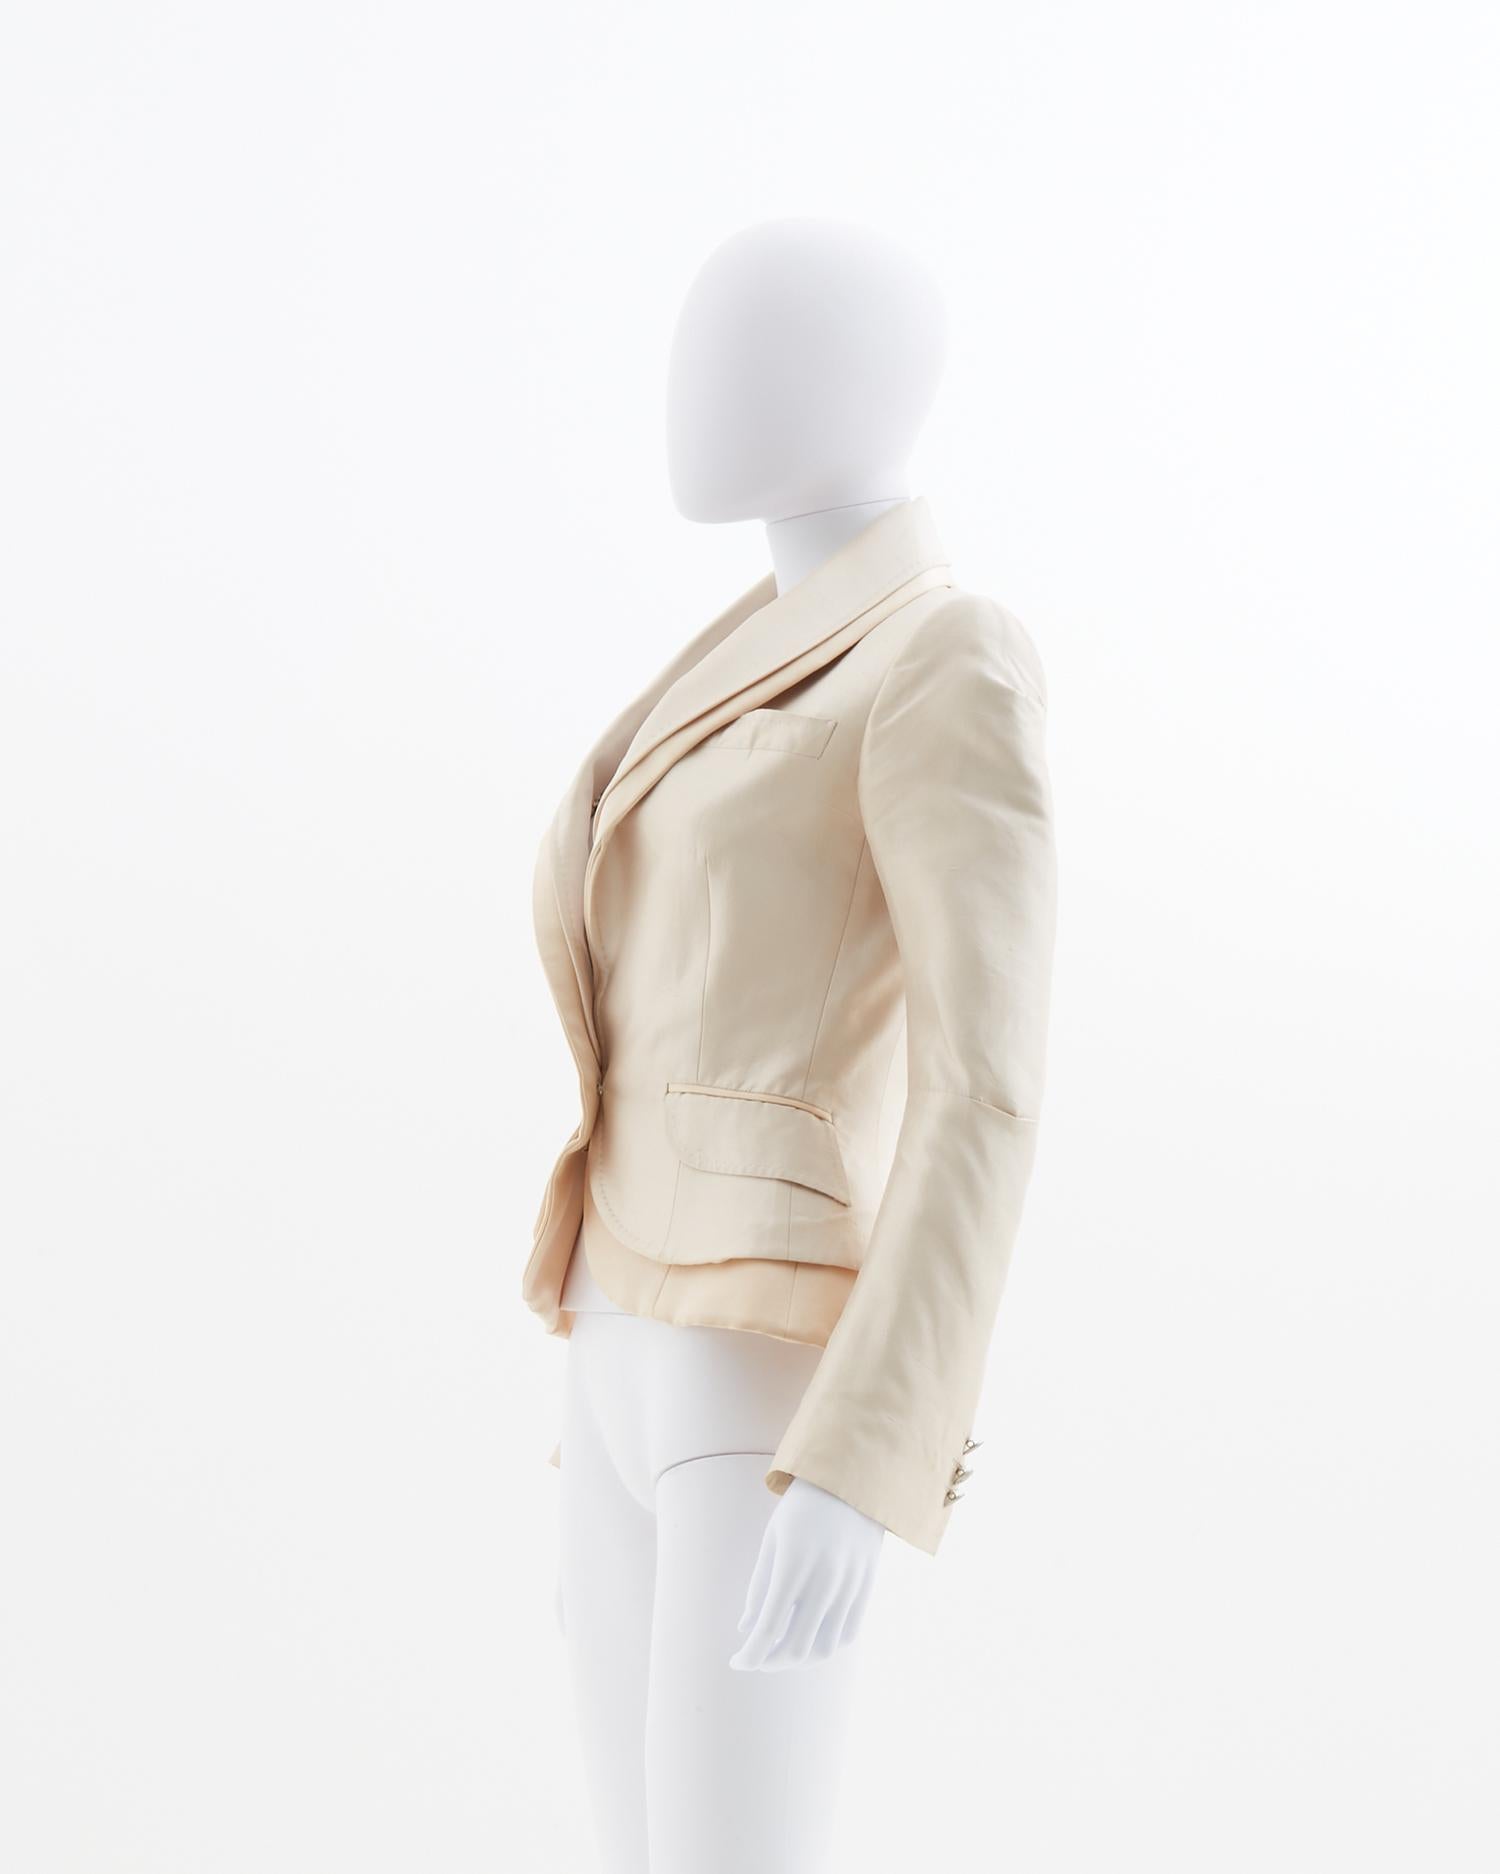 - Runway Looks 19, 26, 32, 51
- Sold by Skof.Archive
- Ivory silk jacket 
- Single breasted button closure 
- Spring Summer 2005
- Fitted to the body

Size : 
FR 34 - IT 38 - UK 6 - US 2 (EU)

Composition :
100% Silk

Dimension : 
Shoulder 36 cm /